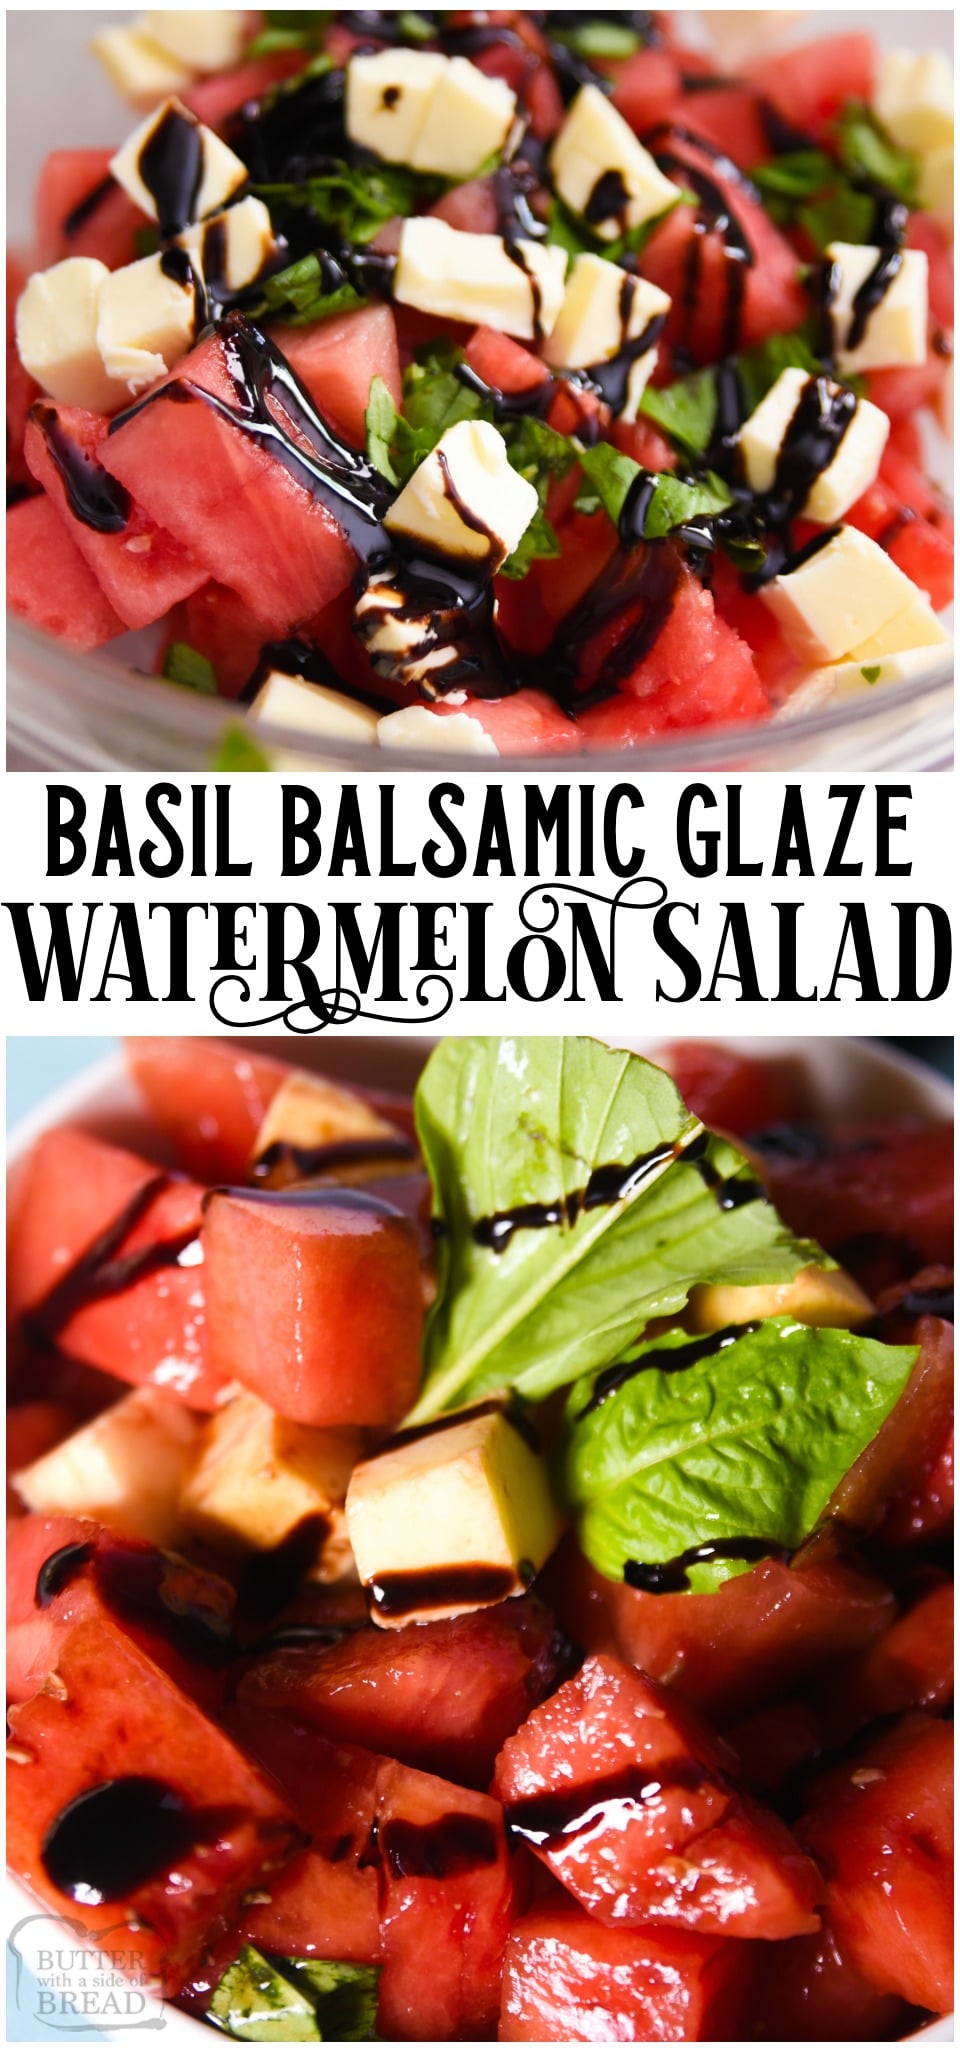 Watermelon Salad recipe with just 4 ingredients! Delightful mix of sweet and savory flavors in this watermelon salad with basil and balsamic vinegar! #watermelon #basil #balsamic #recipe #salad #easyrecipe from BUTTER WITH A SIDE OF BREAD